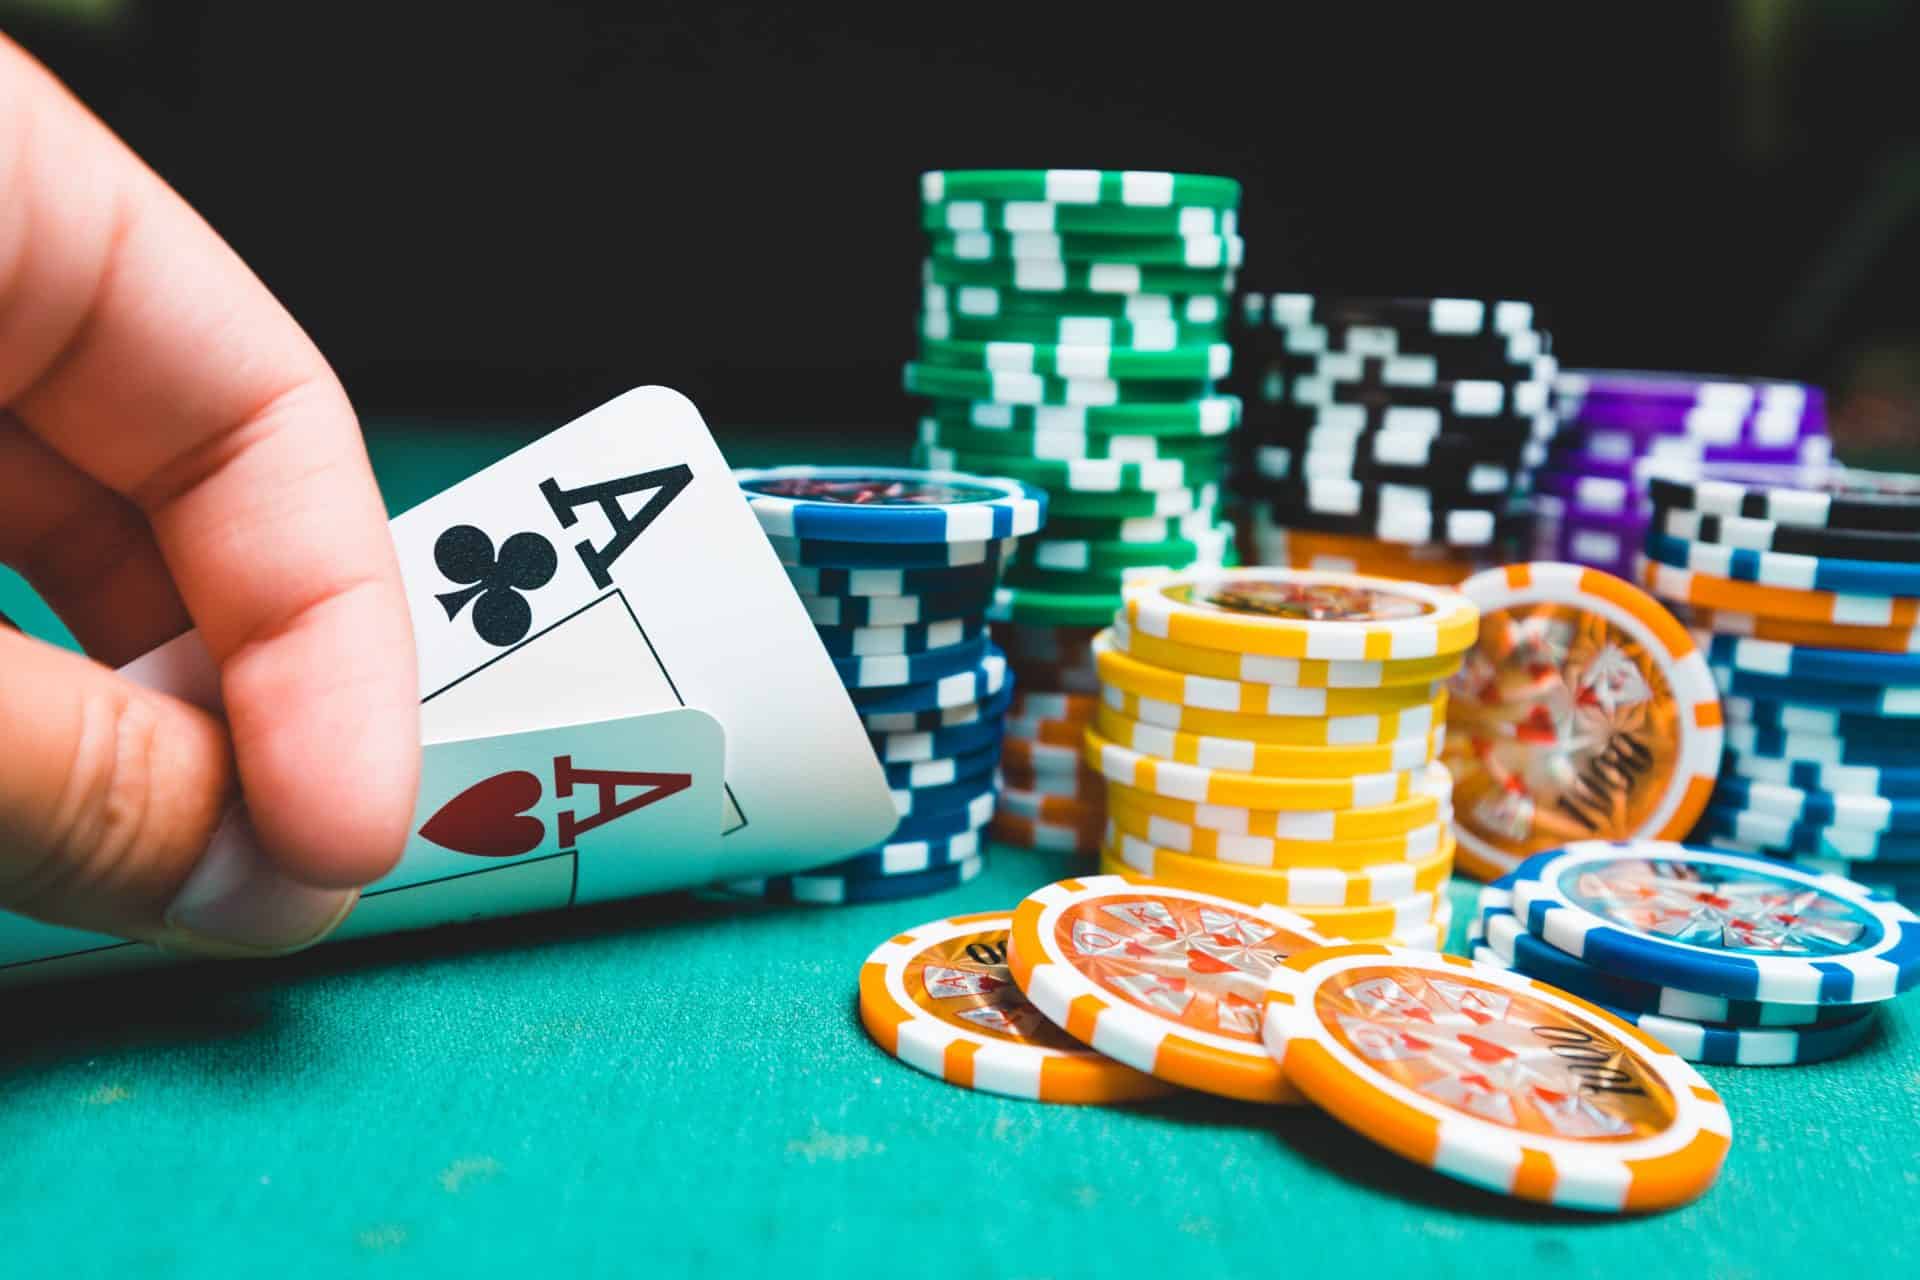 Read the article to find out what machine learning is and what role it can play in poker.